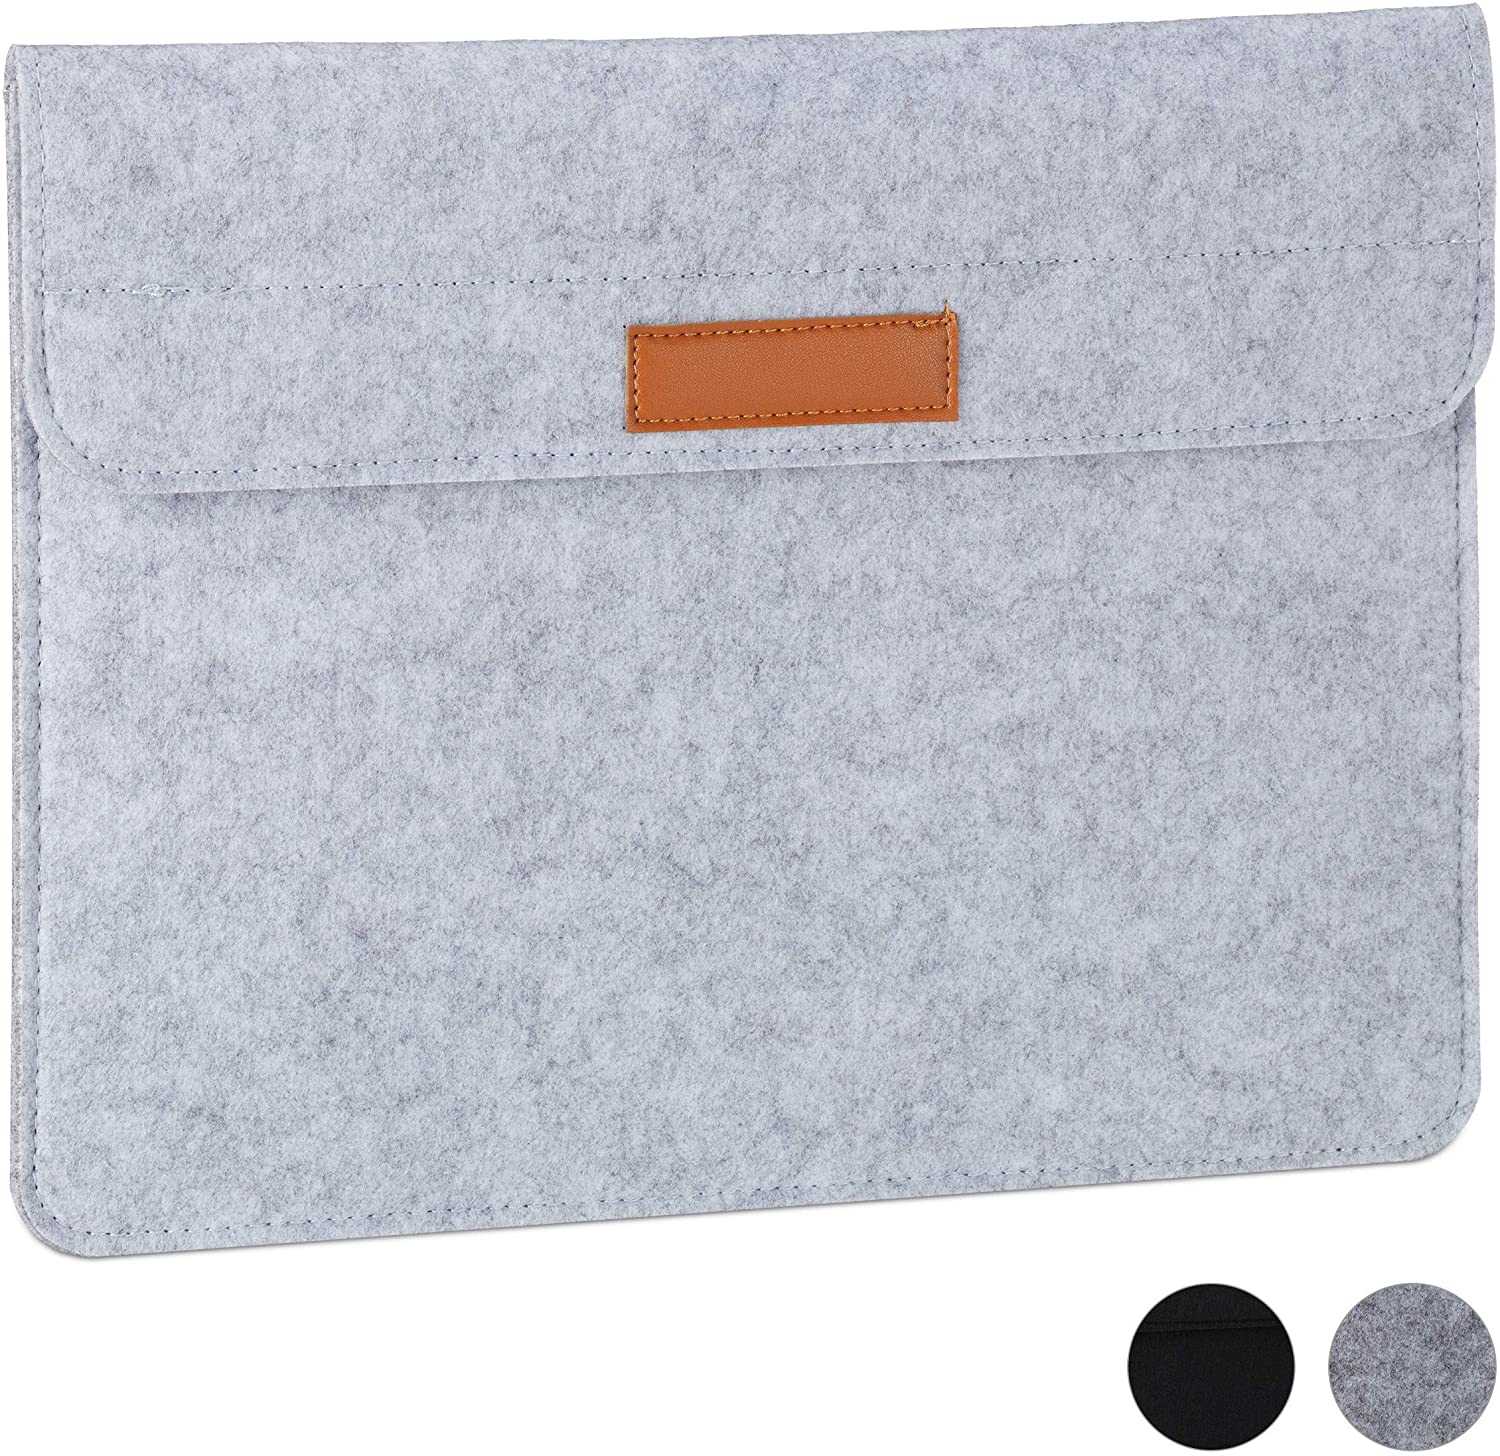 Relaxdays Laptop Sleeve 13 Inch Felt Protective Laptop & Notebook 4 Compart